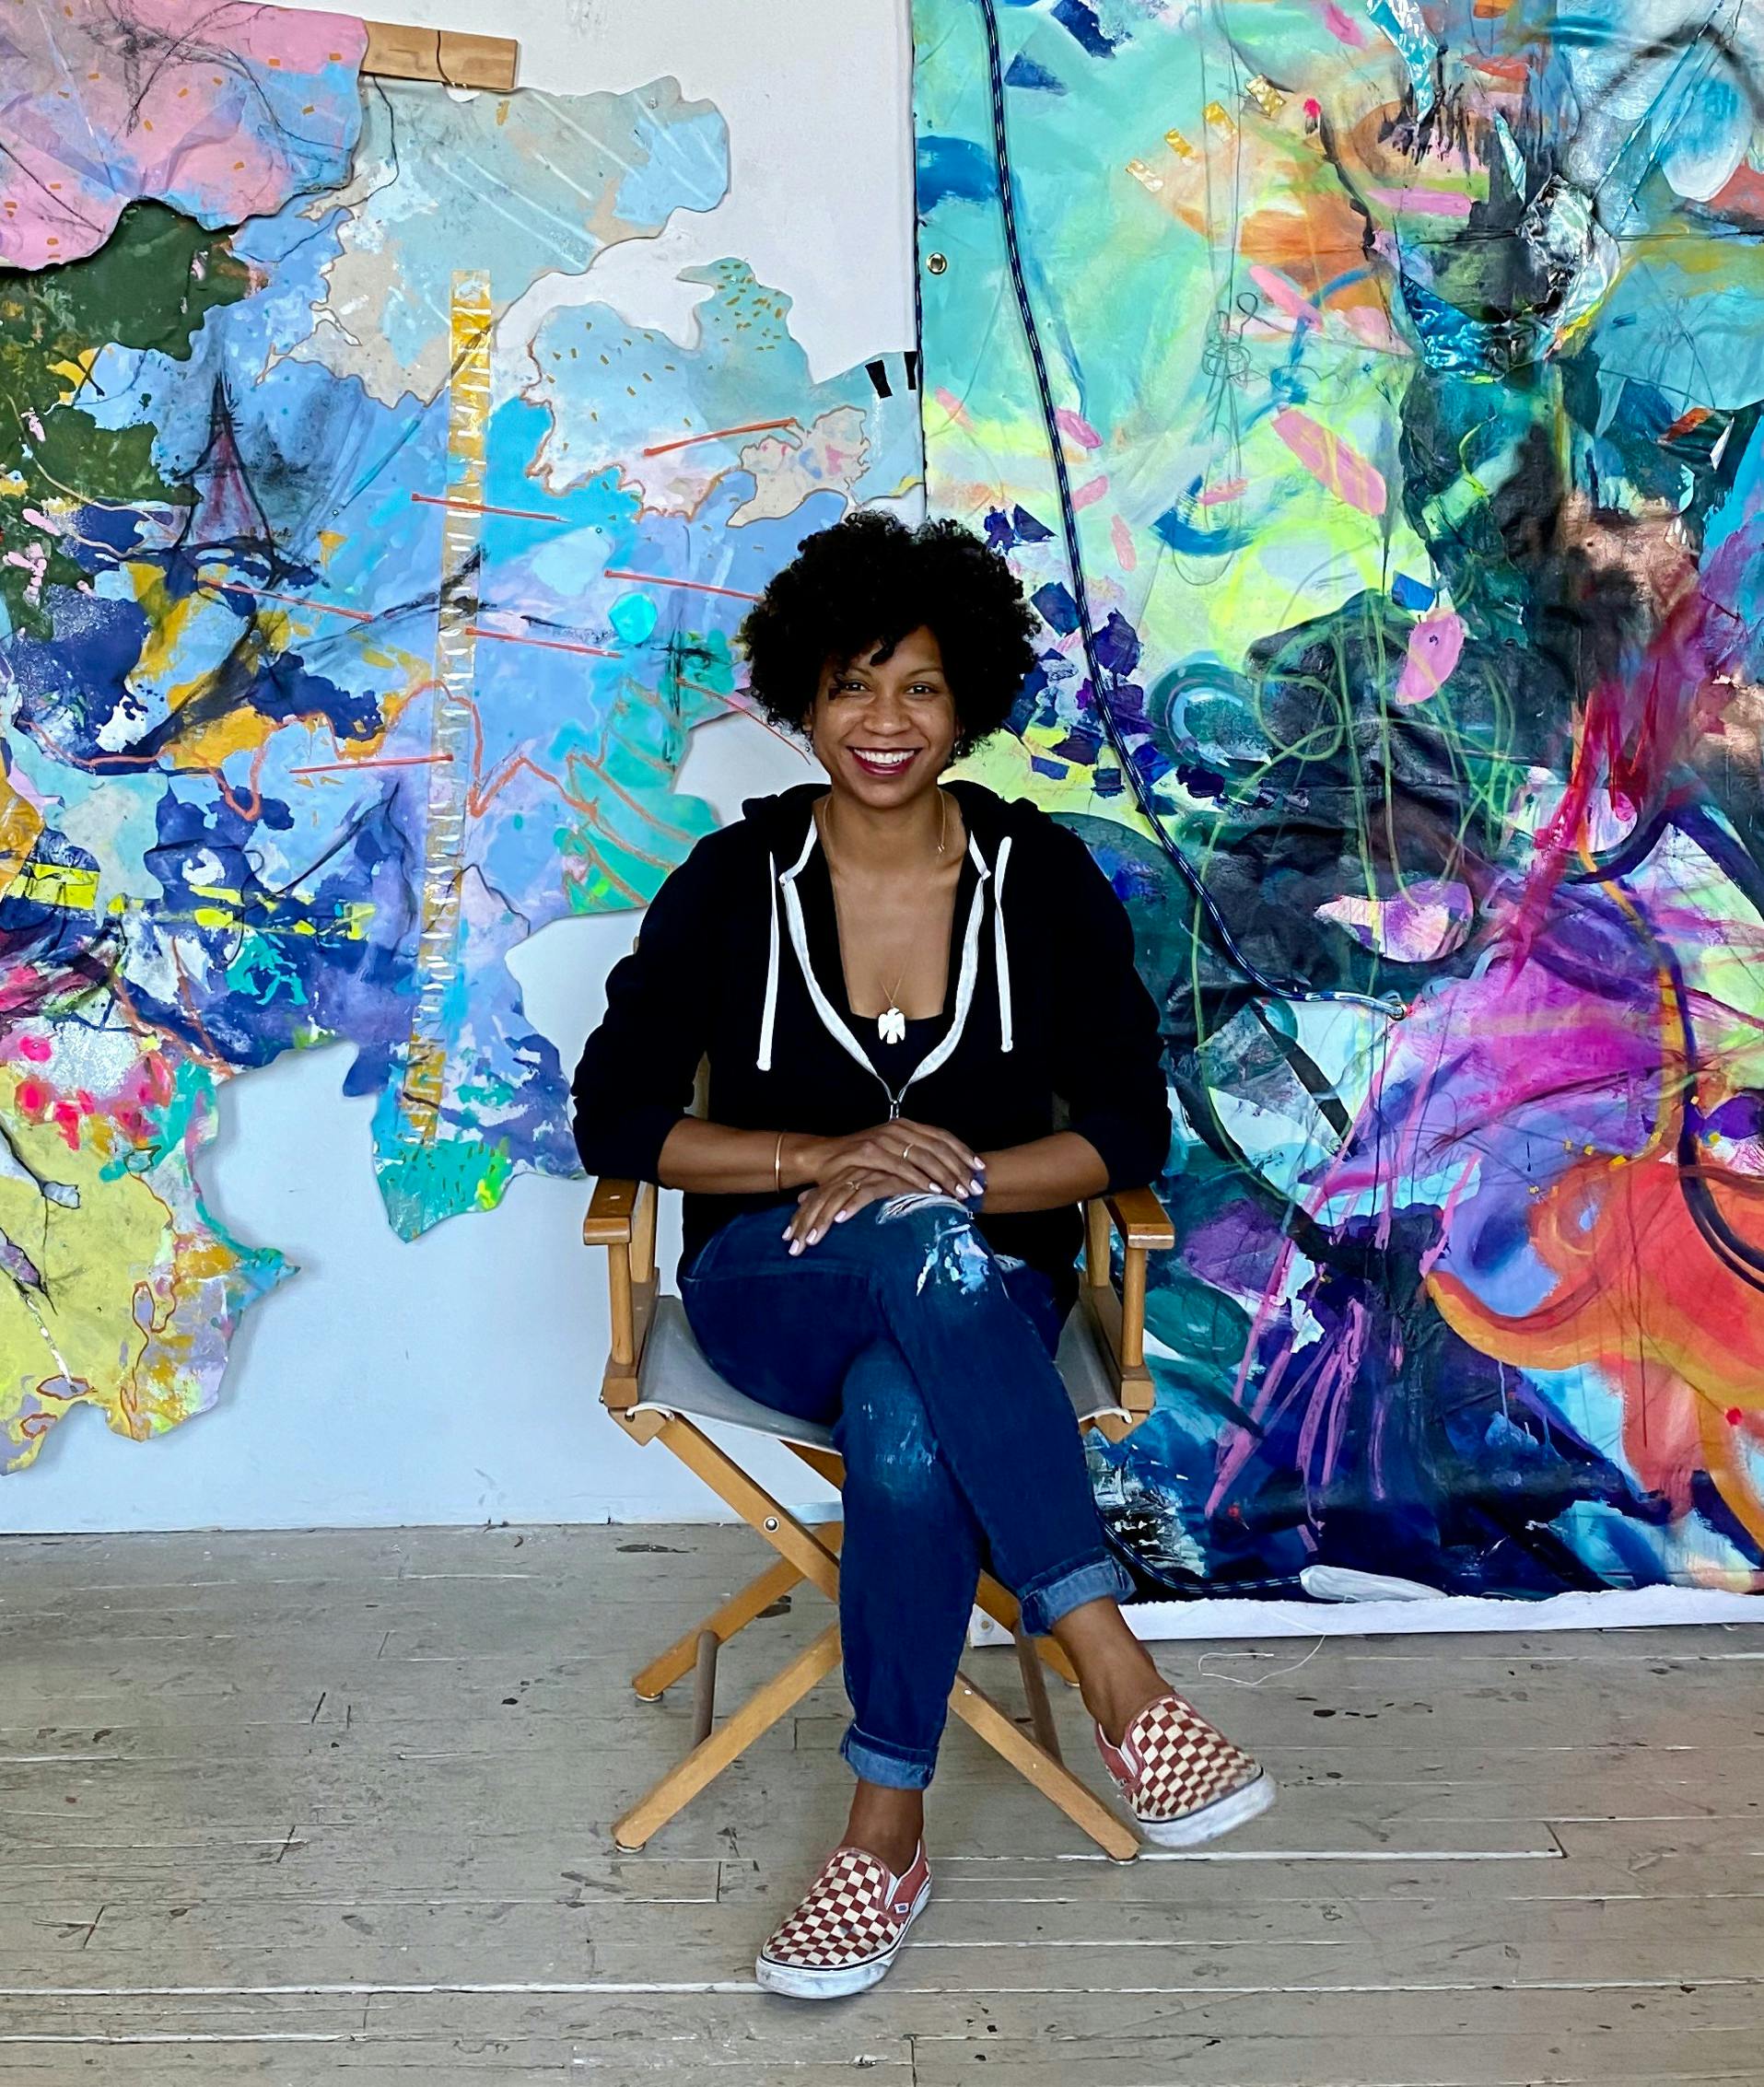 Cicely Carew sits, smiling, in front of a lush, colorful work of art she has created, in her Waltham studio.